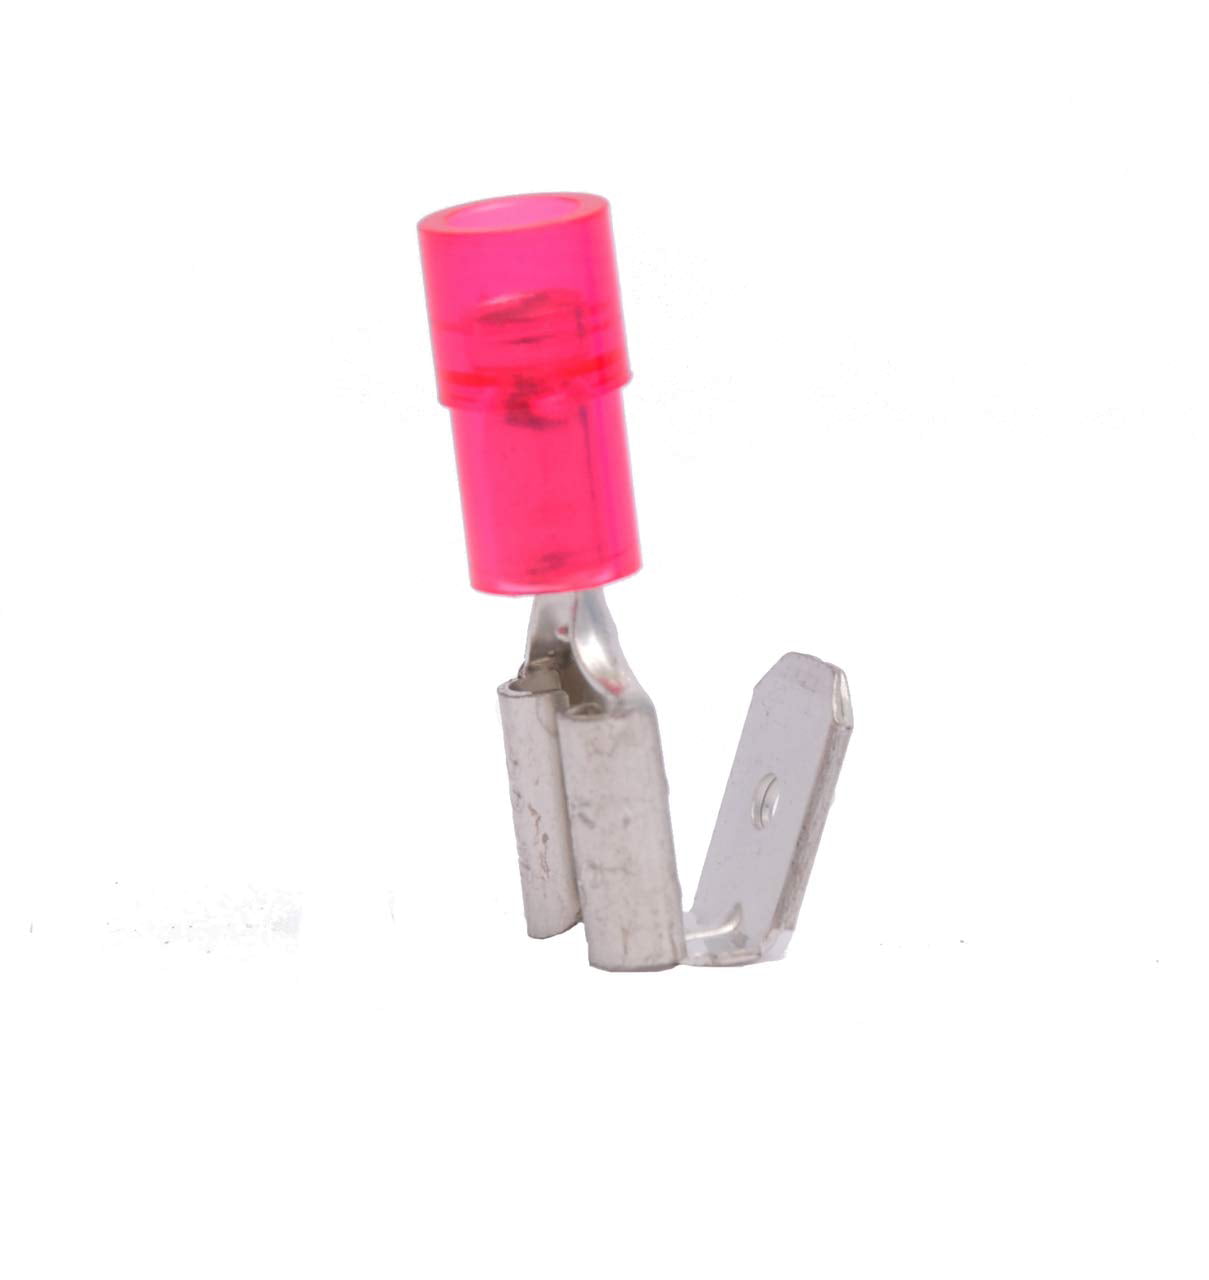 For Motorcycle-Scooter High Quality .250-6.3mm Male Spade Terminals 100 pc's 